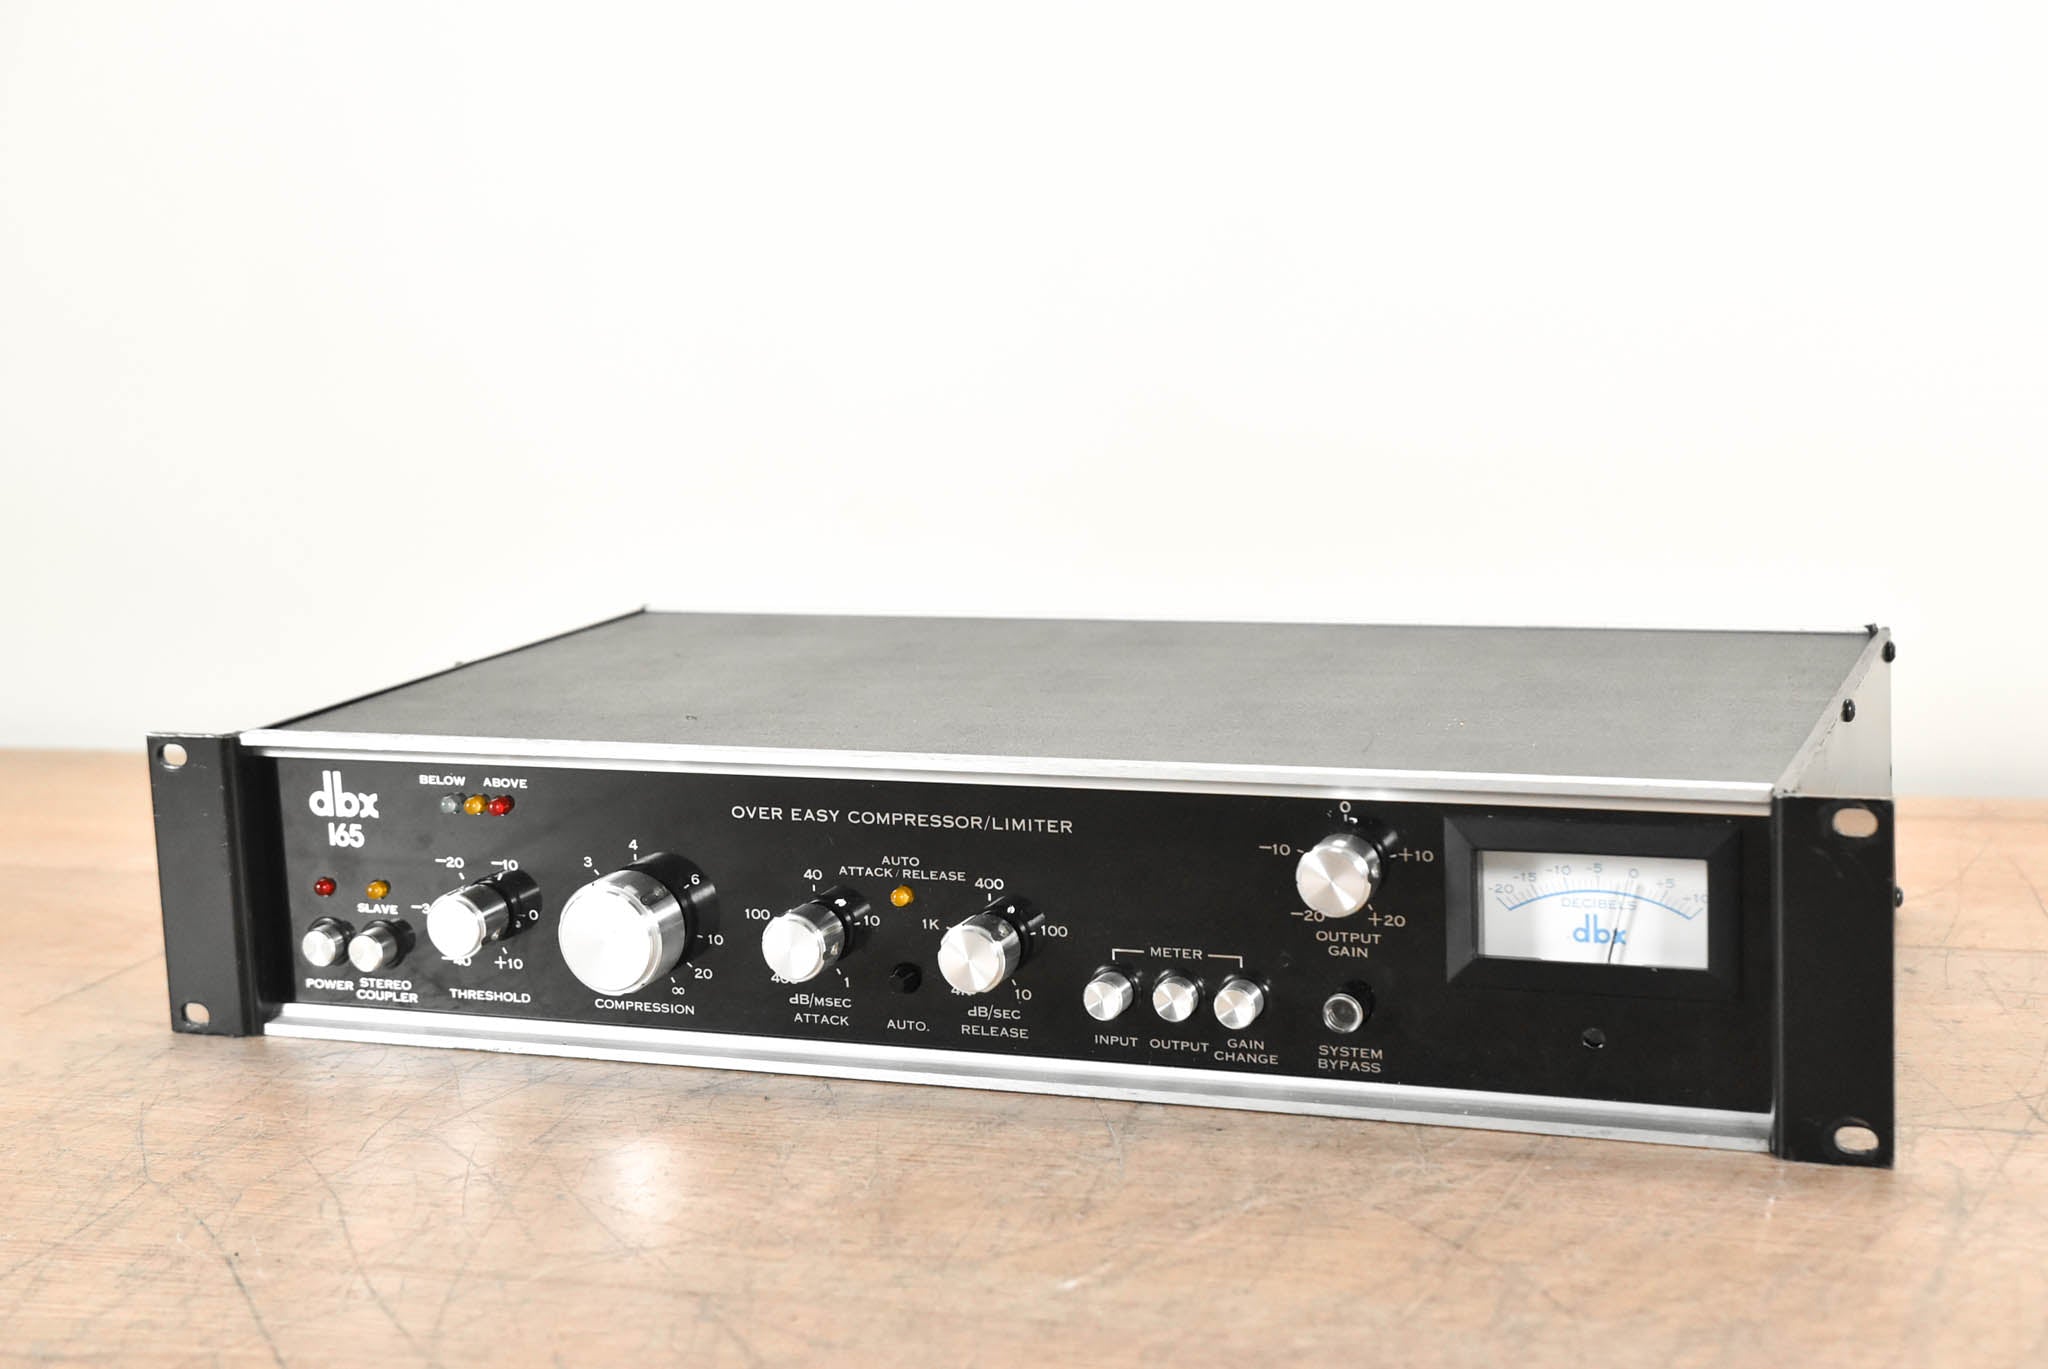 dbx 165 Single-Channel Over Easy Compressor/Limiter